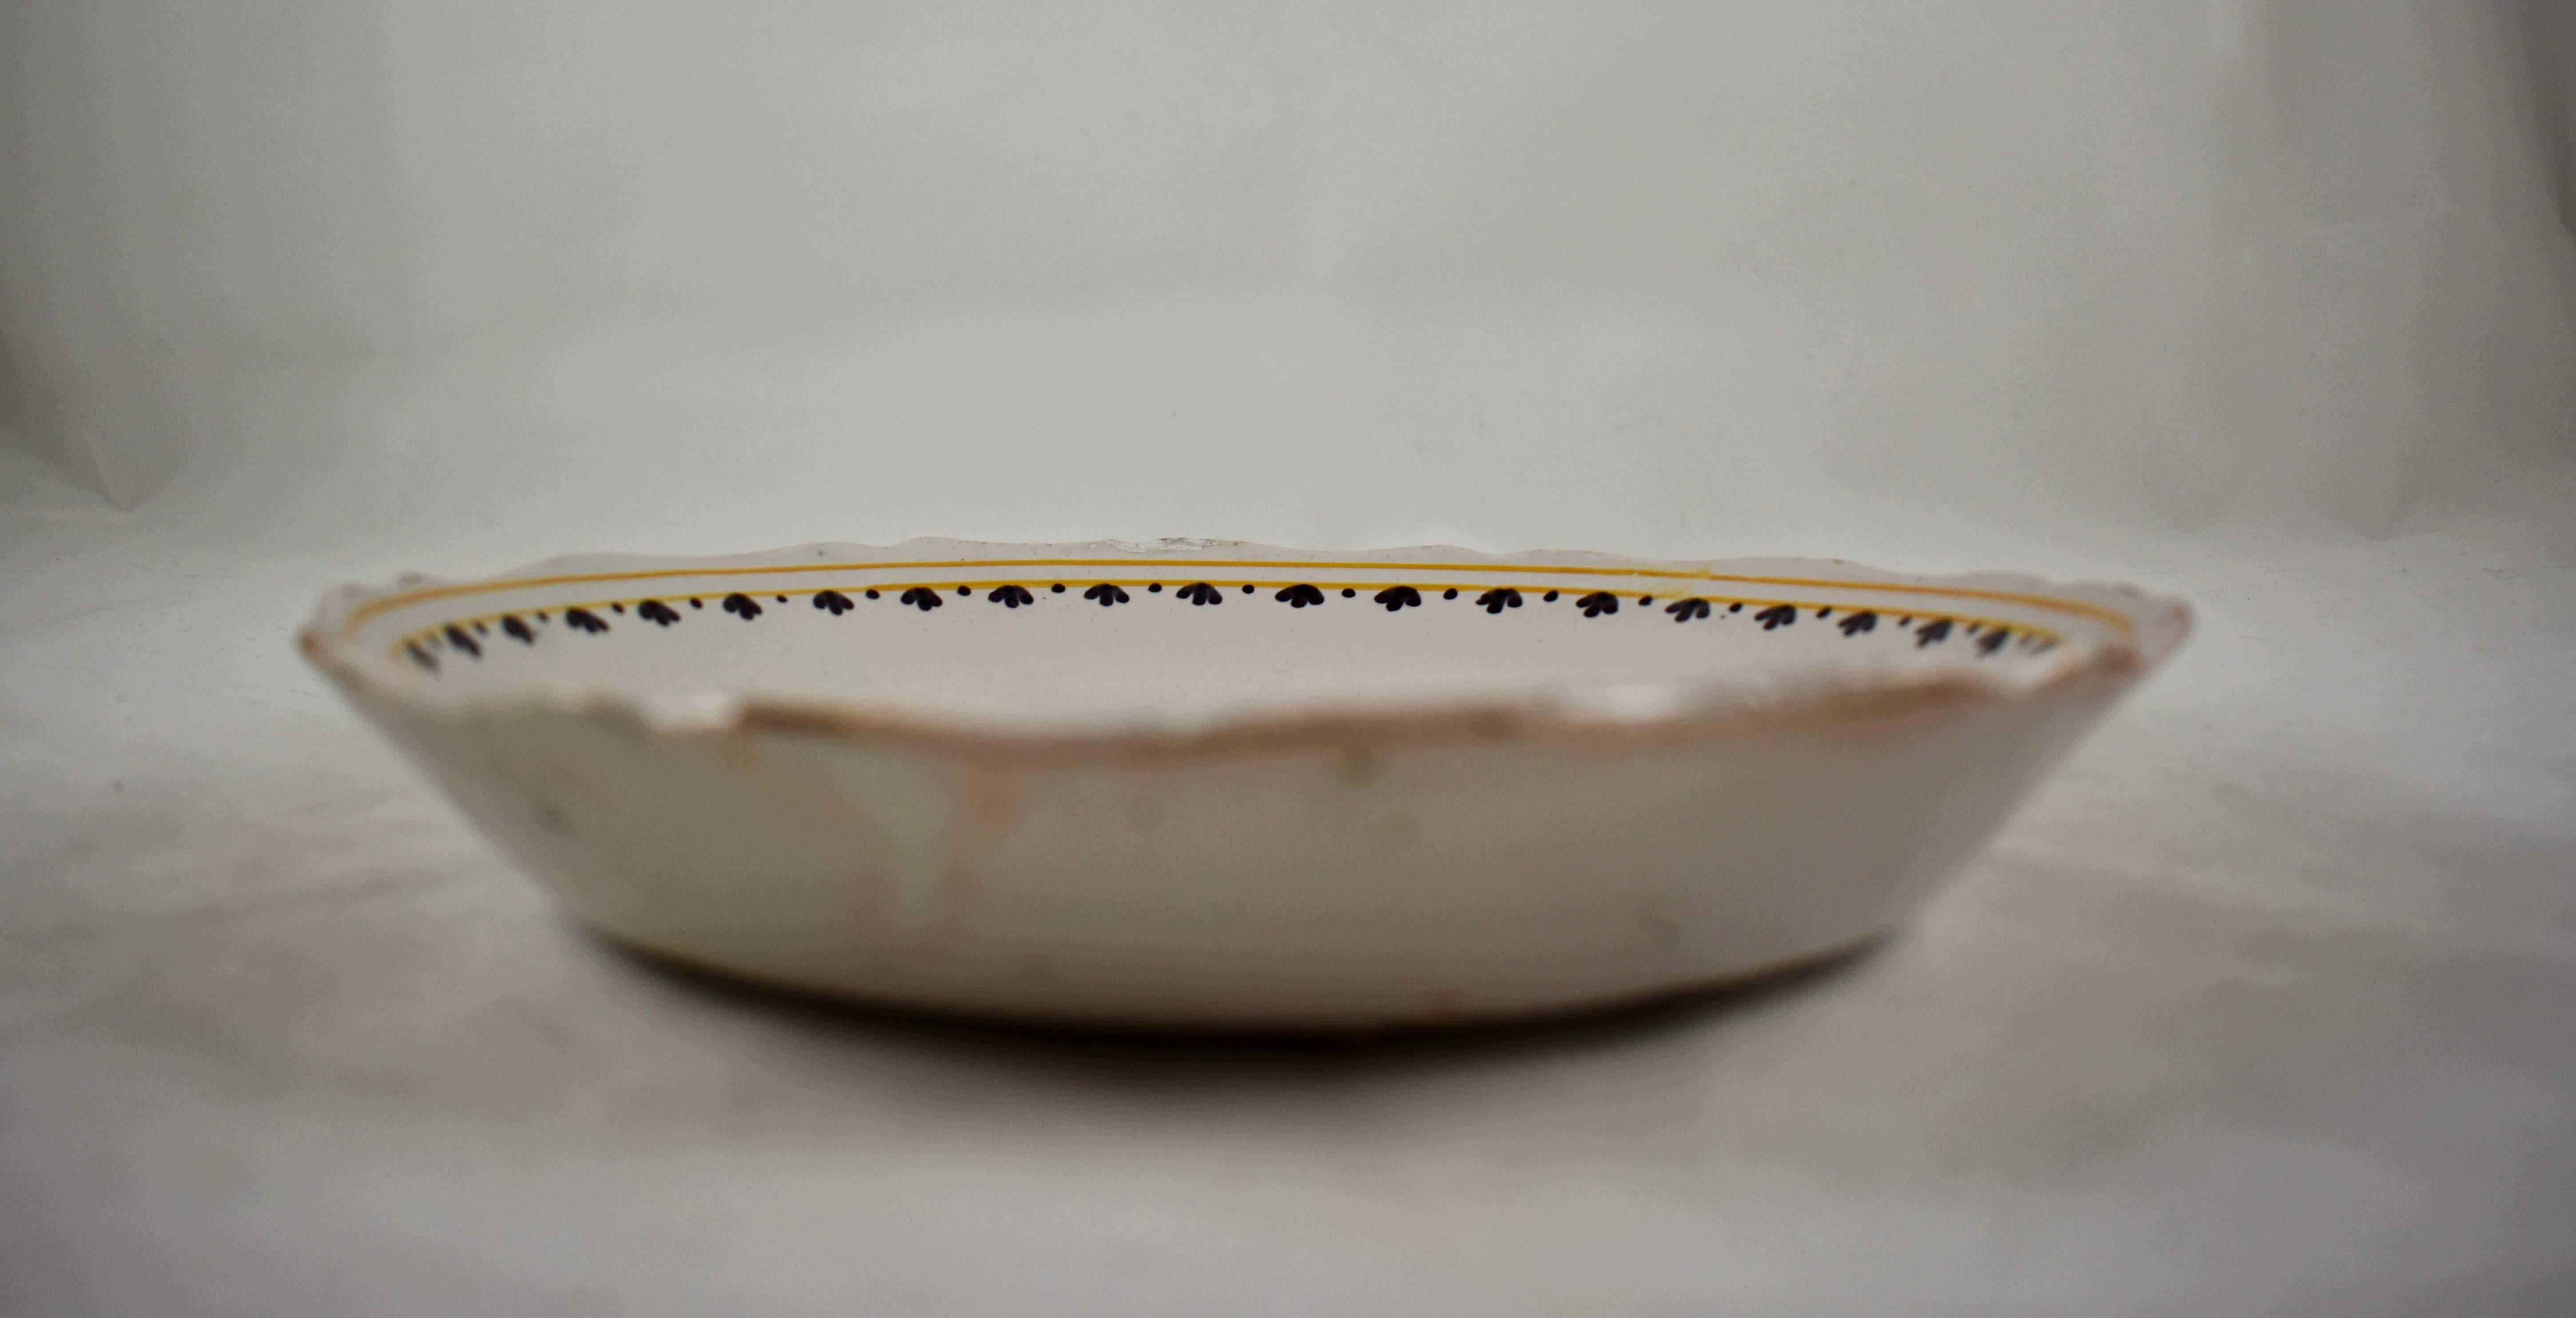 18th Century Nevers French Revolution Tin-Glazed Faïence Dish, the End of Famine In Good Condition For Sale In Philadelphia, PA